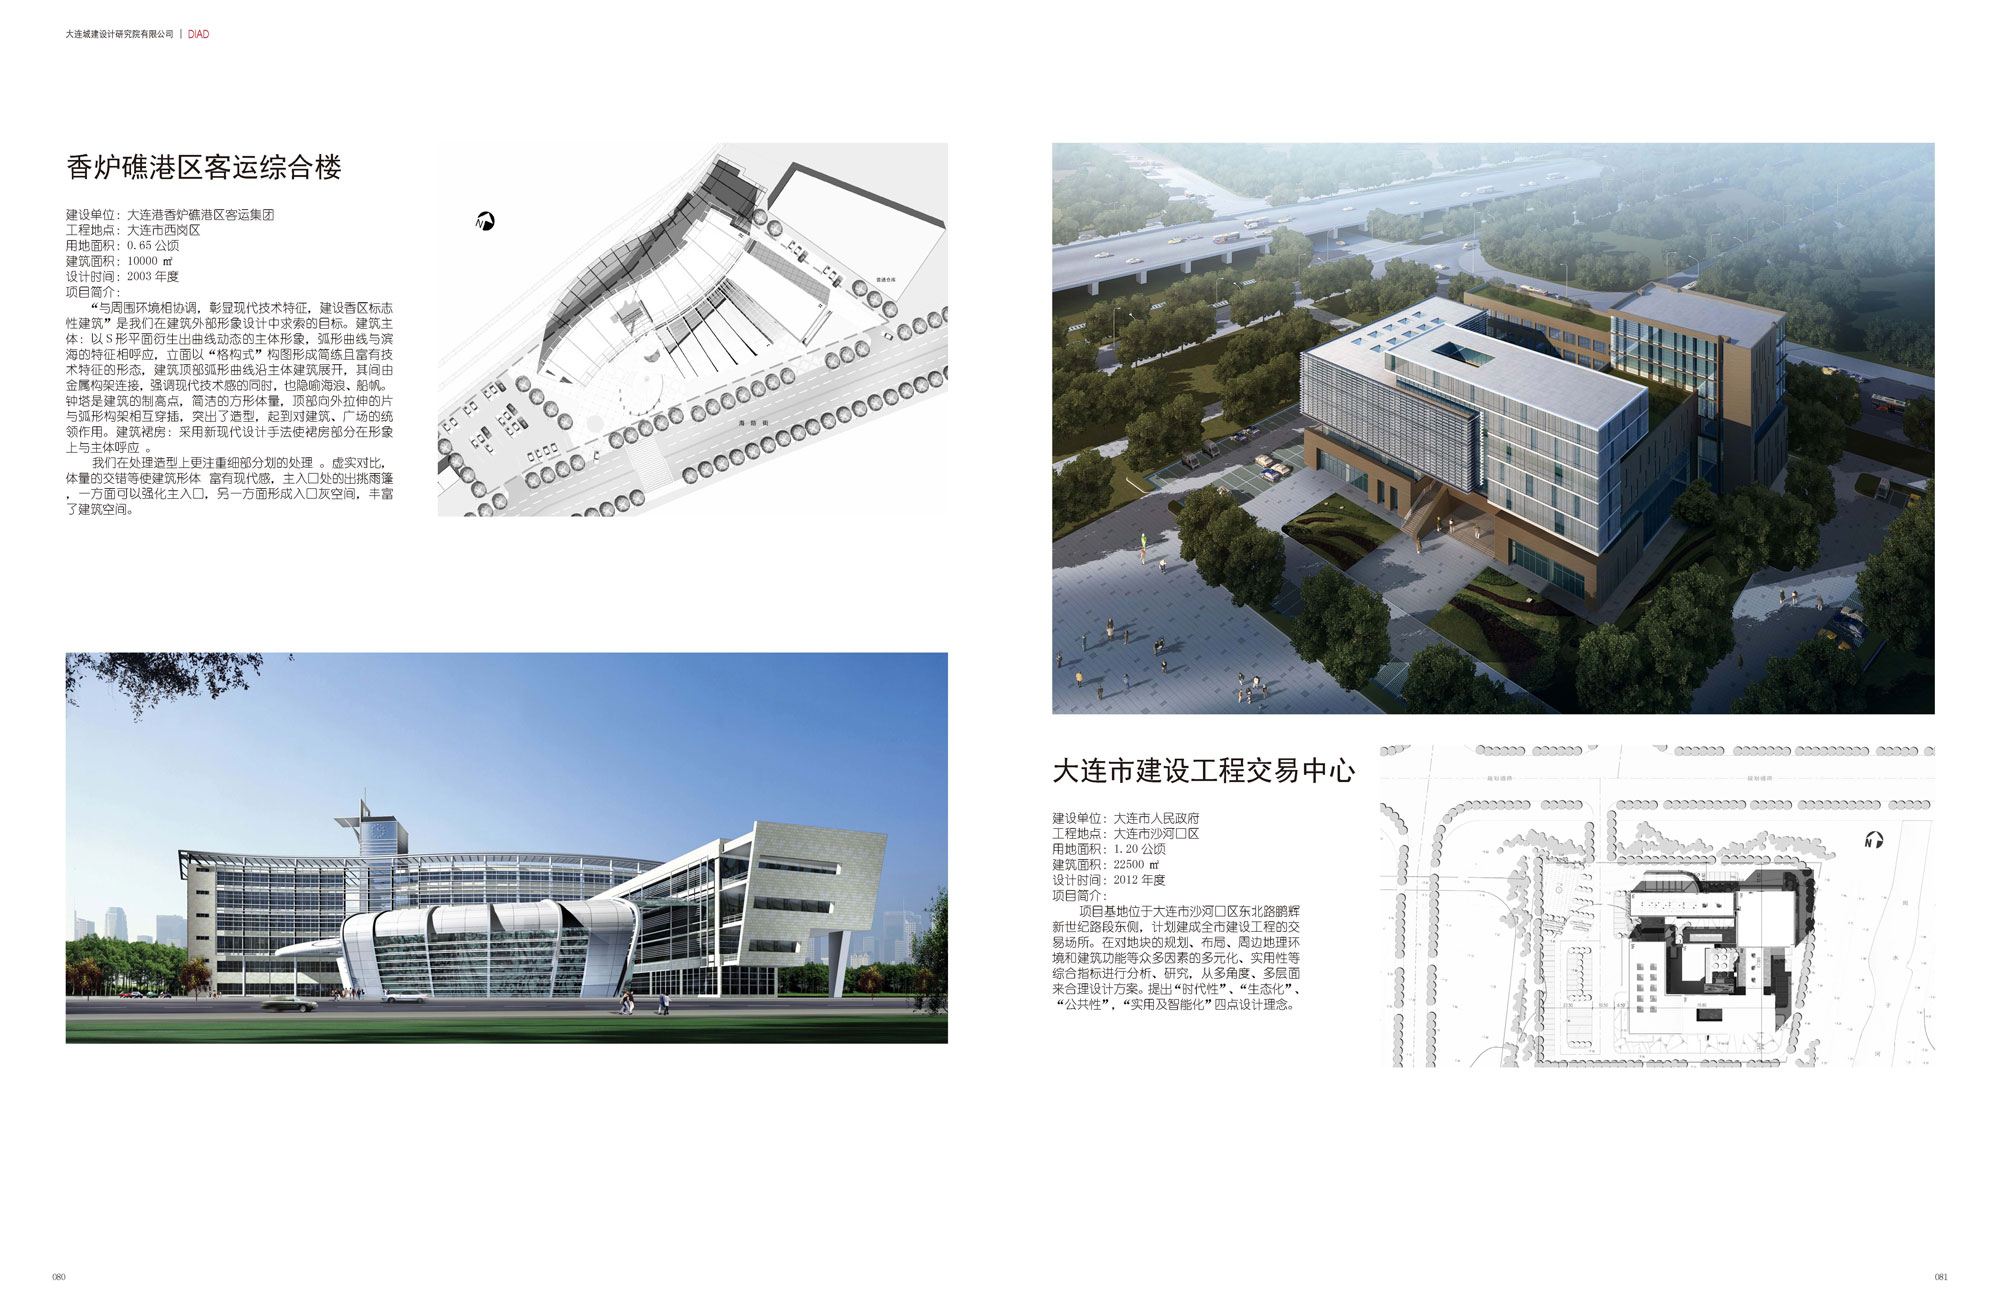 Xianglujiao Harbour District Passenger Transport Complex Building & Dalian Construction Projects Trad